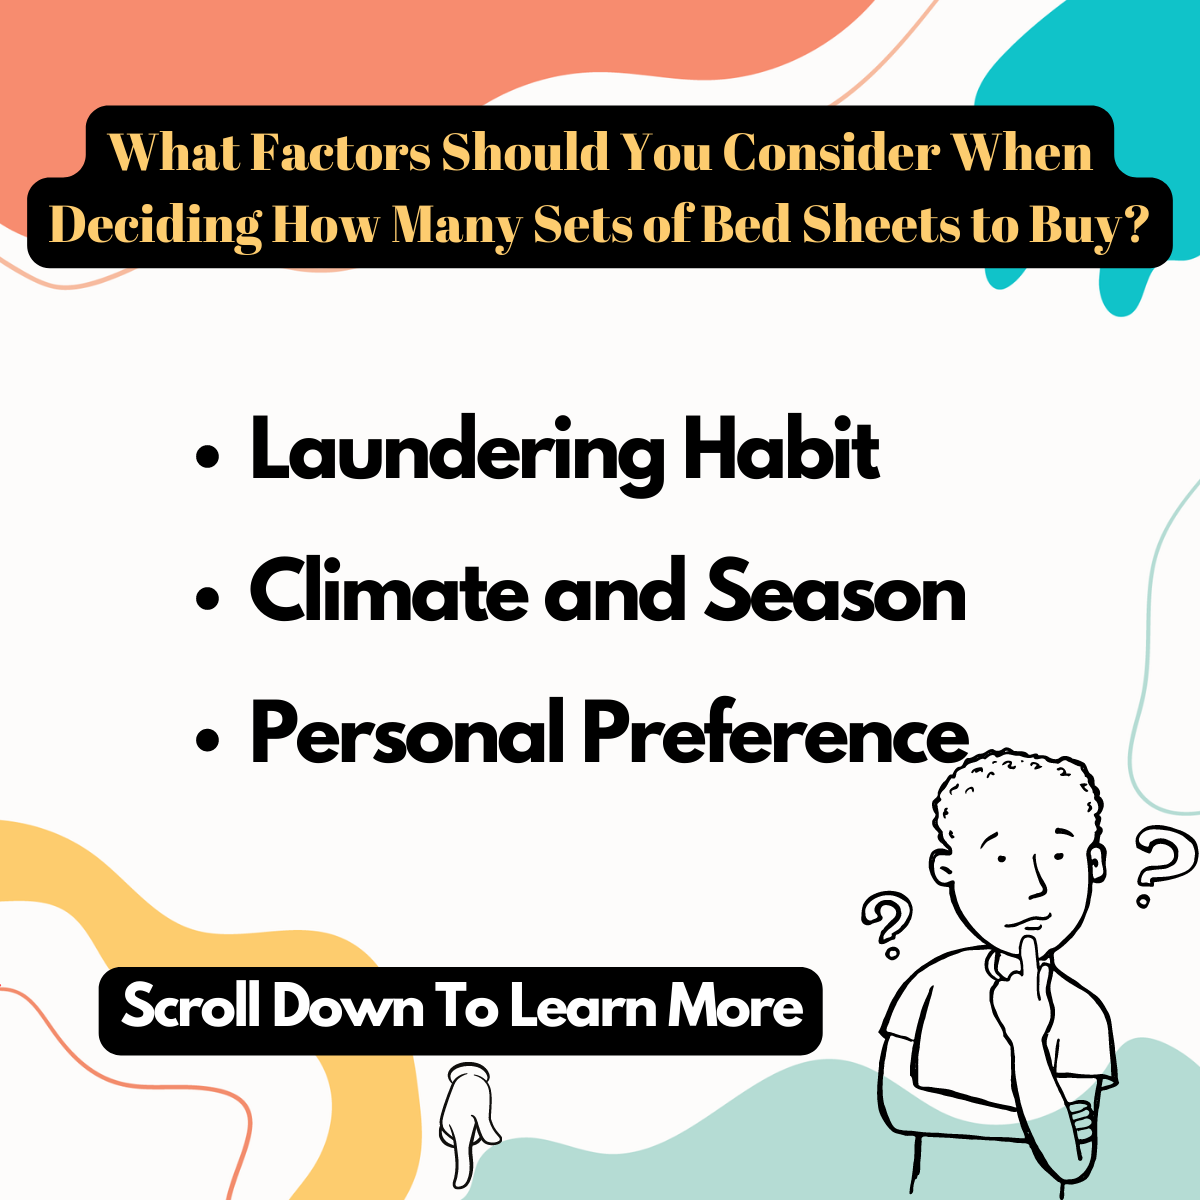 What Factors Should You Consider When Deciding How Many Sets of Bed Sheets to Buy